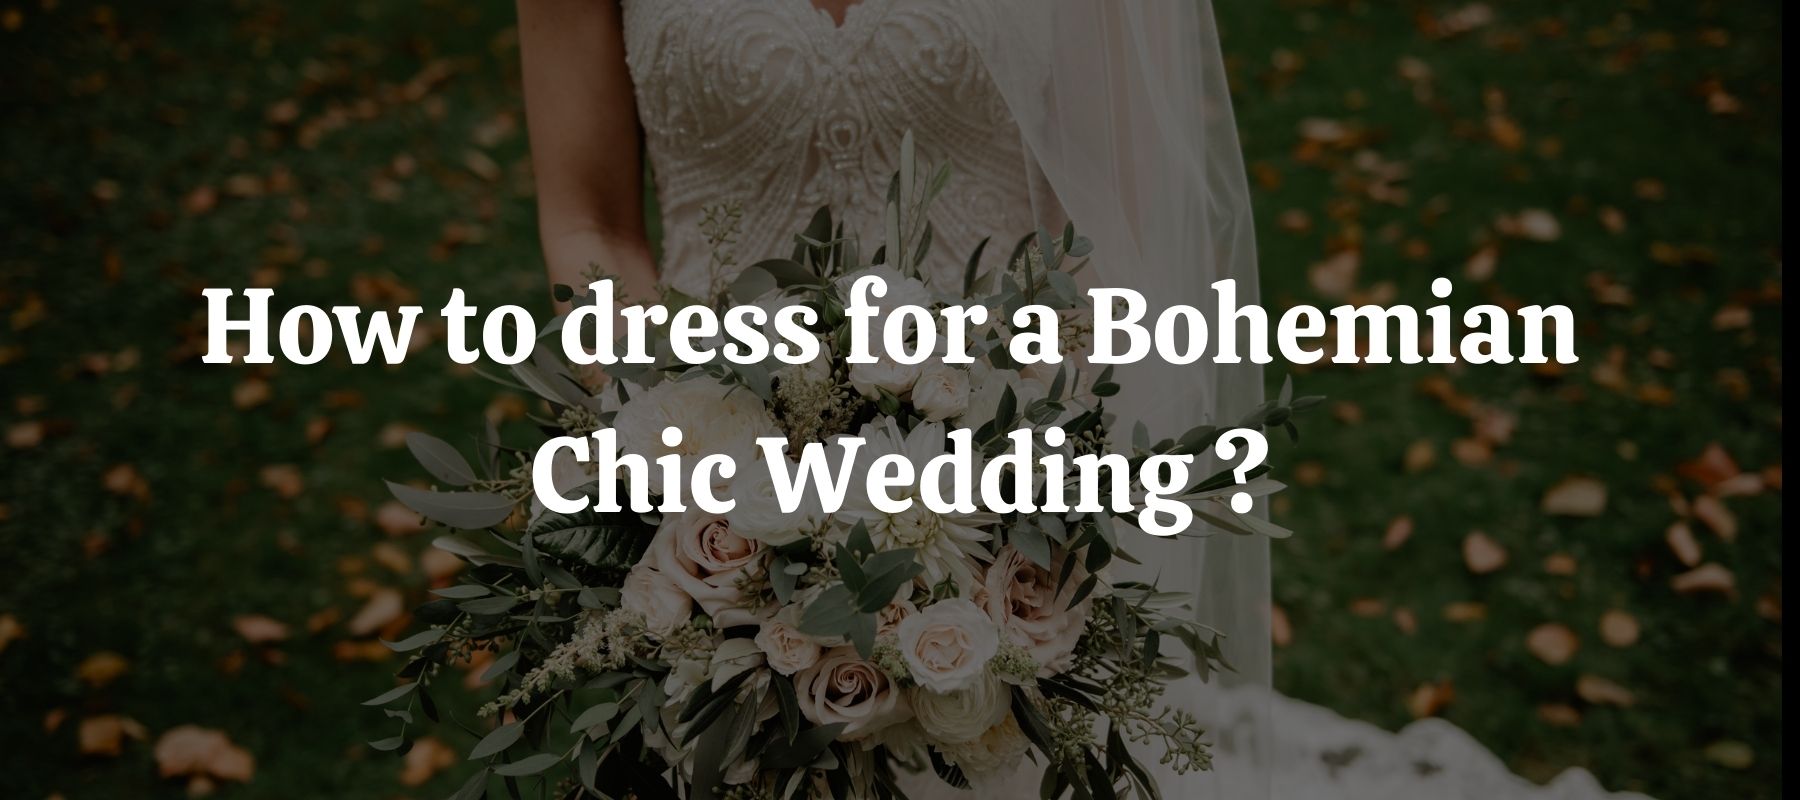 How to dress for a Bohemian Chic Wedding